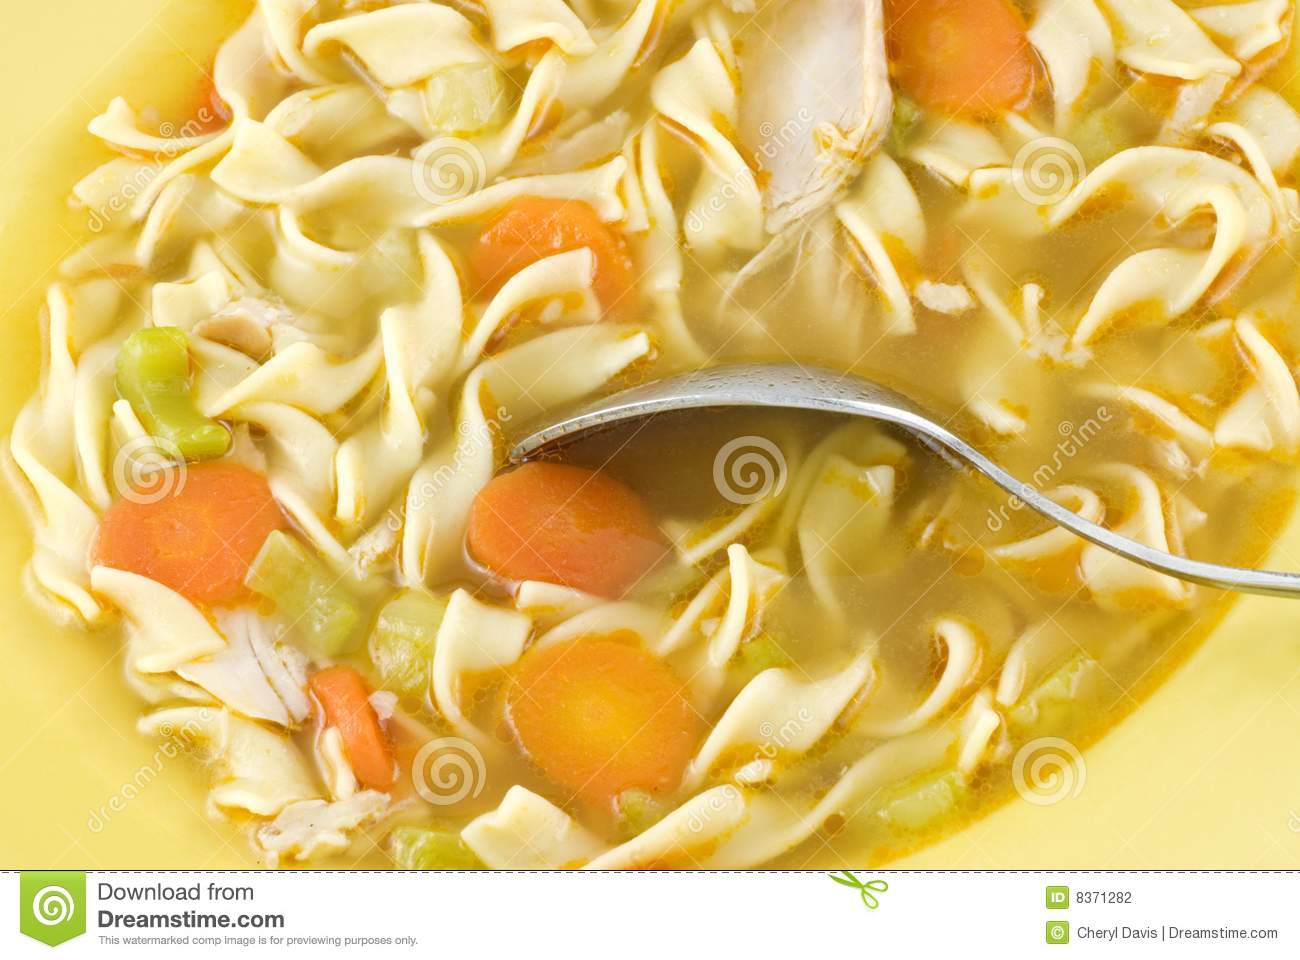 Homemade Chicken Noodle Soup With Carrots And Celery In A Yellow Bowl